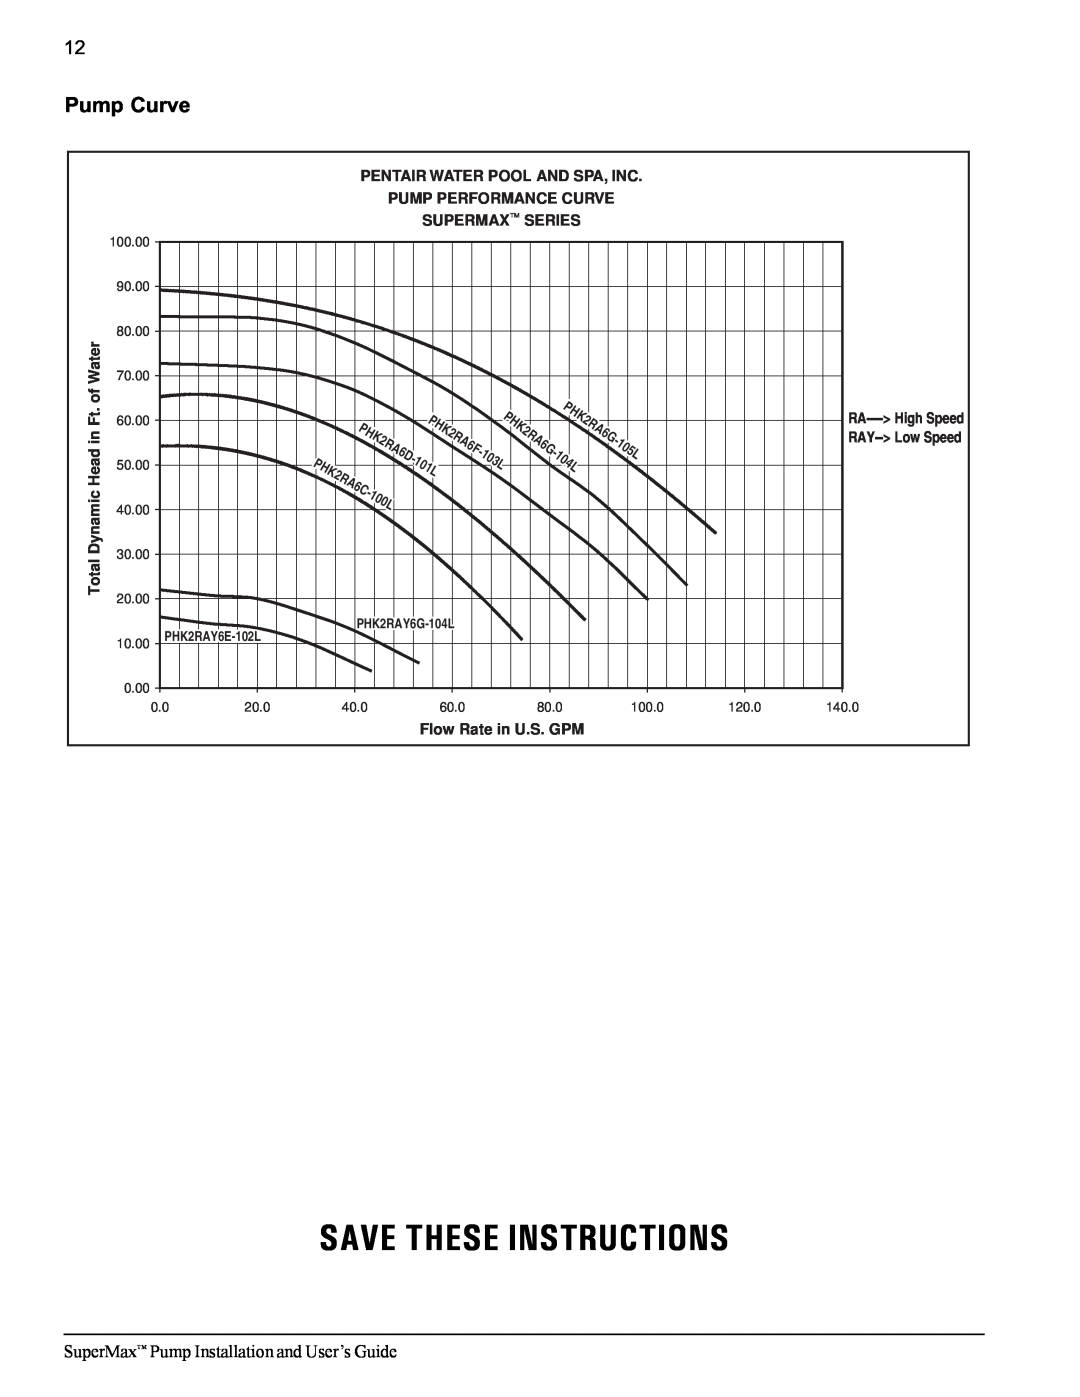 Pentair Pump Curve, Save These Instructions, PHK2RA6, 100L, SuperMax Pump Installation and User’s Guide 